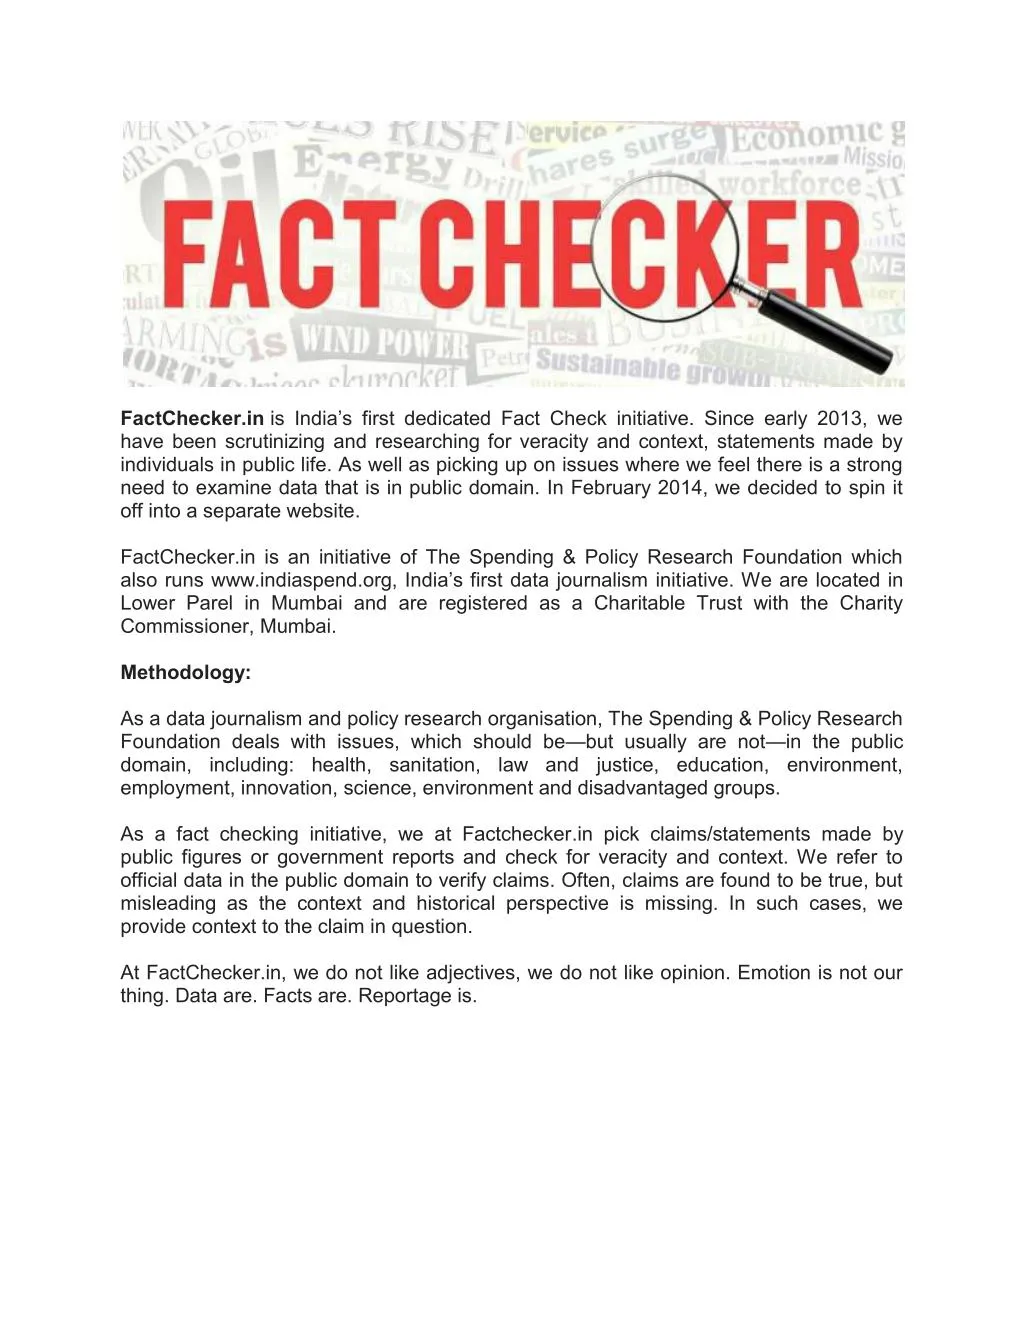 factchecker in is india s first dedicated fact